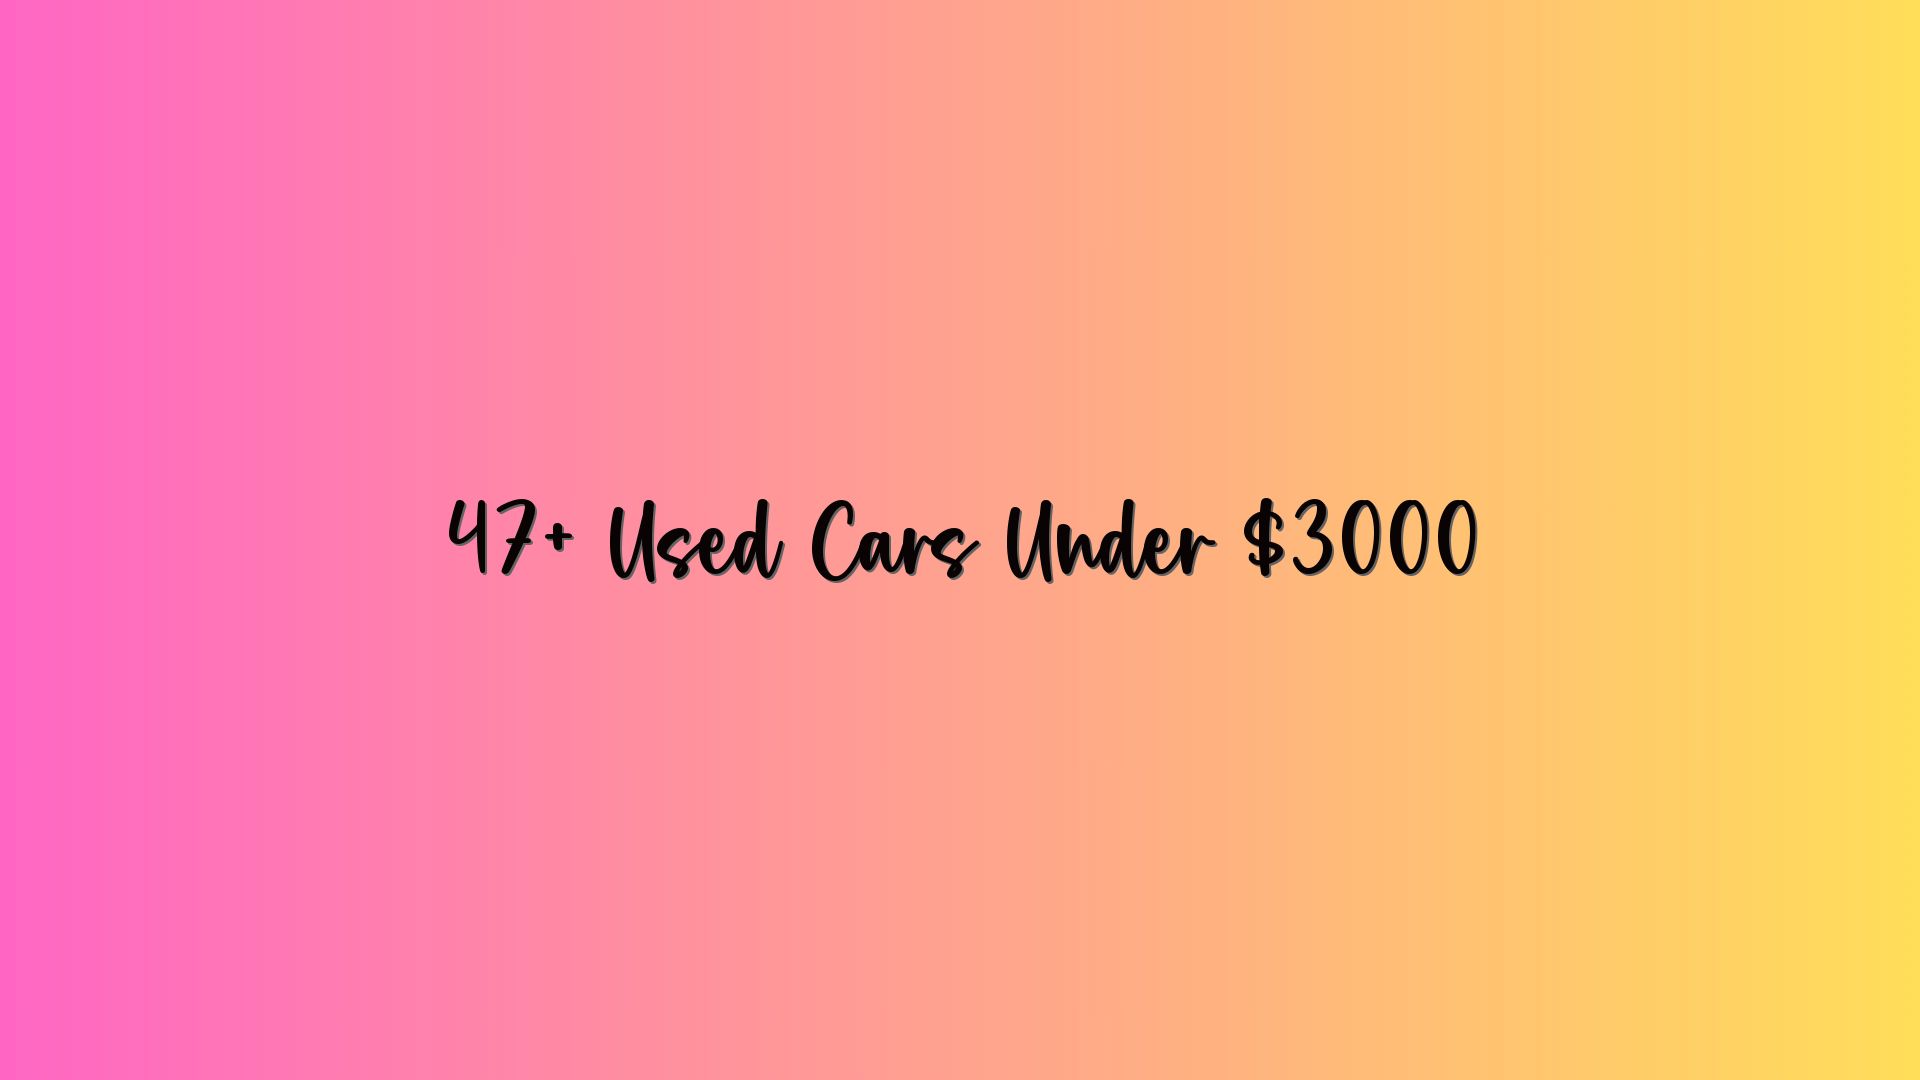 47+ Used Cars Under $3000